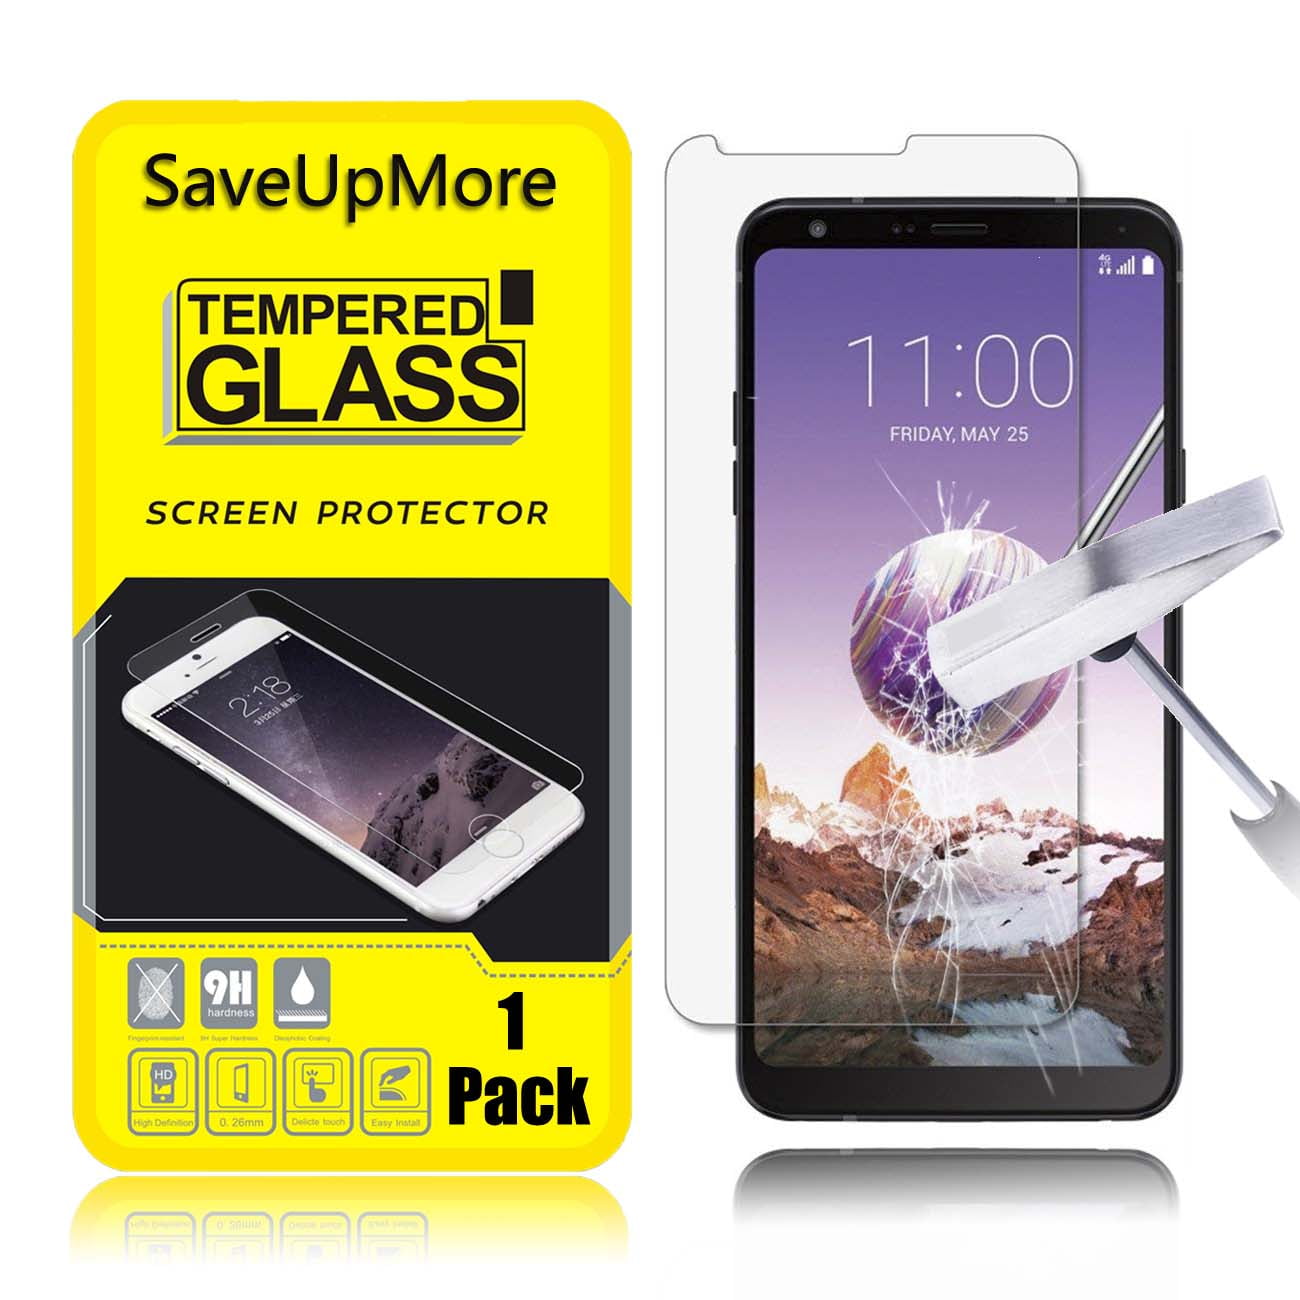 Free Shipping Brand New Screen Protectors WHOLESALE Lot of 100 Assorted 